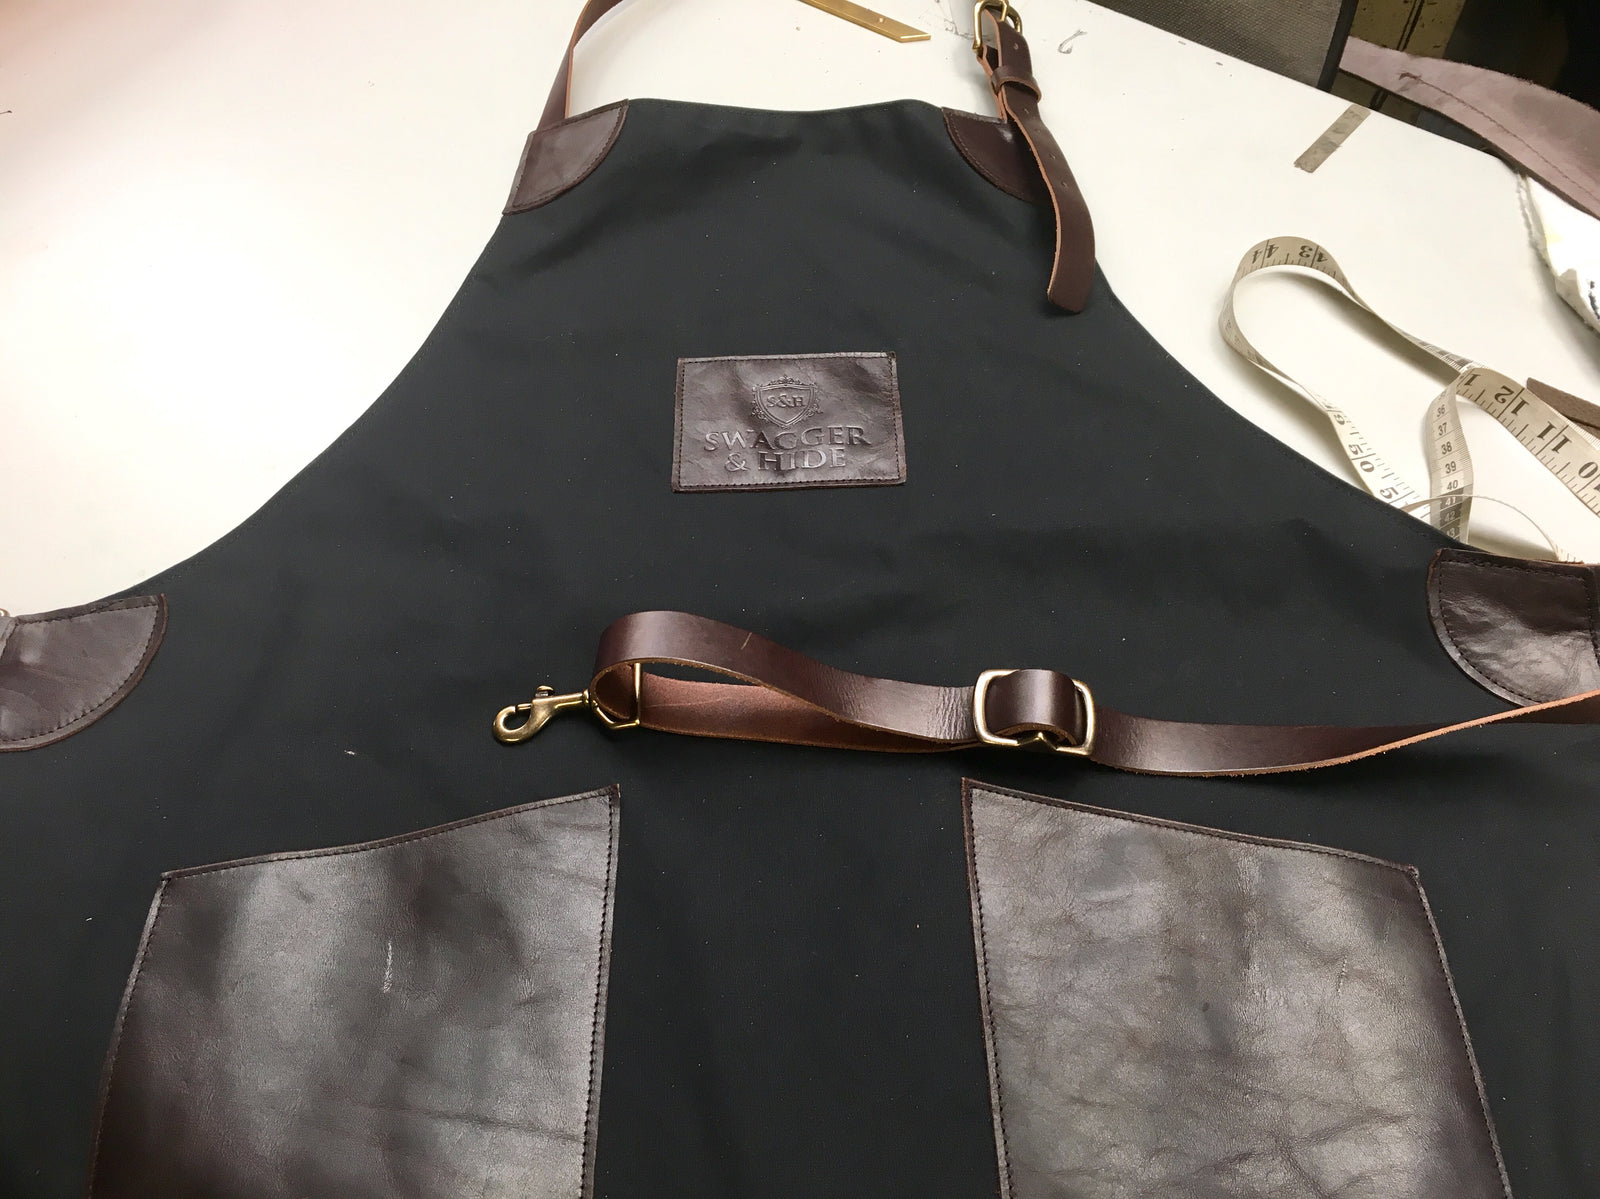 Leather and Canvas Apron - Swagger & Hide | Our leather luggage accessories and leather travel bags make the perfect gift for him!  All of our products are handcrafted and personalised.